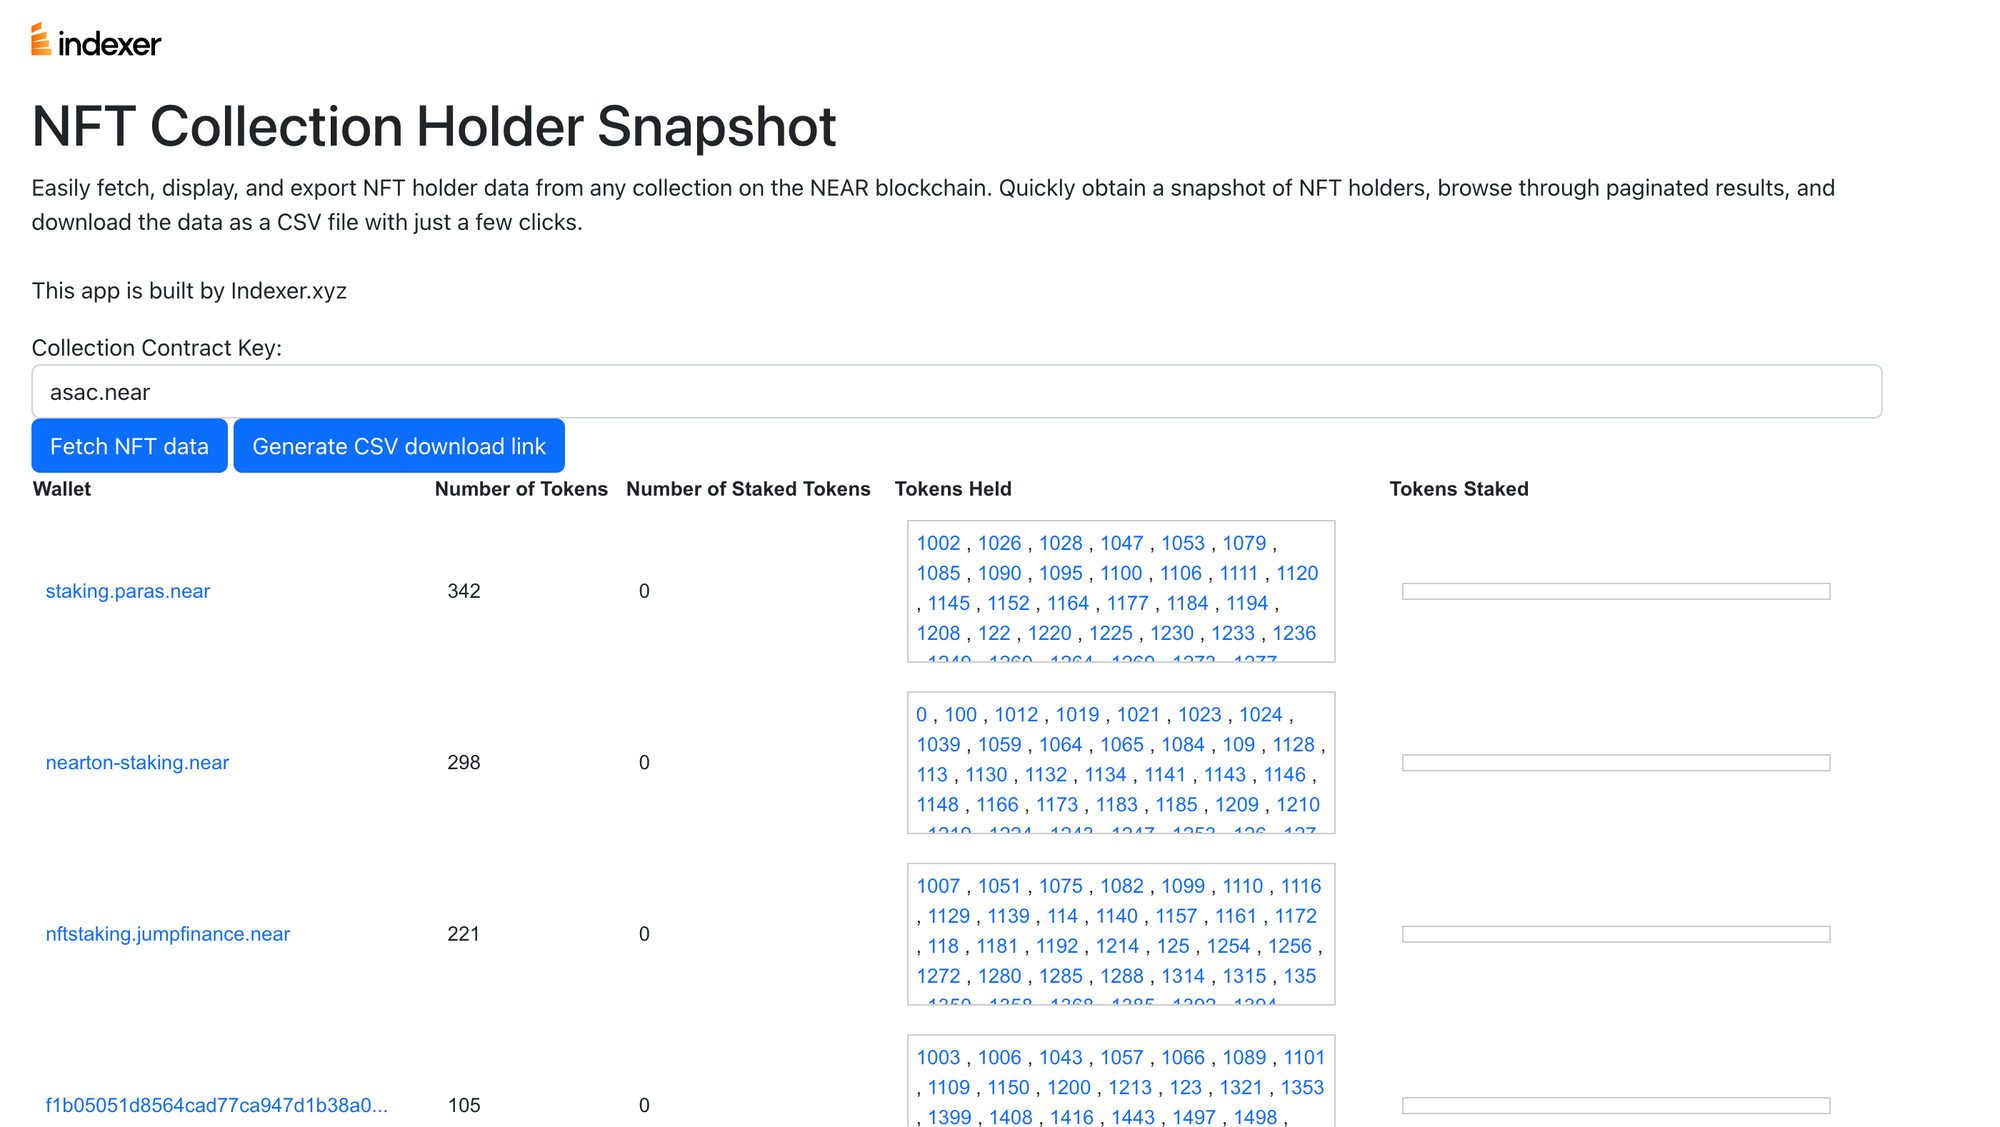 Building an NFT Collection Holder Snapshot App with Near Social